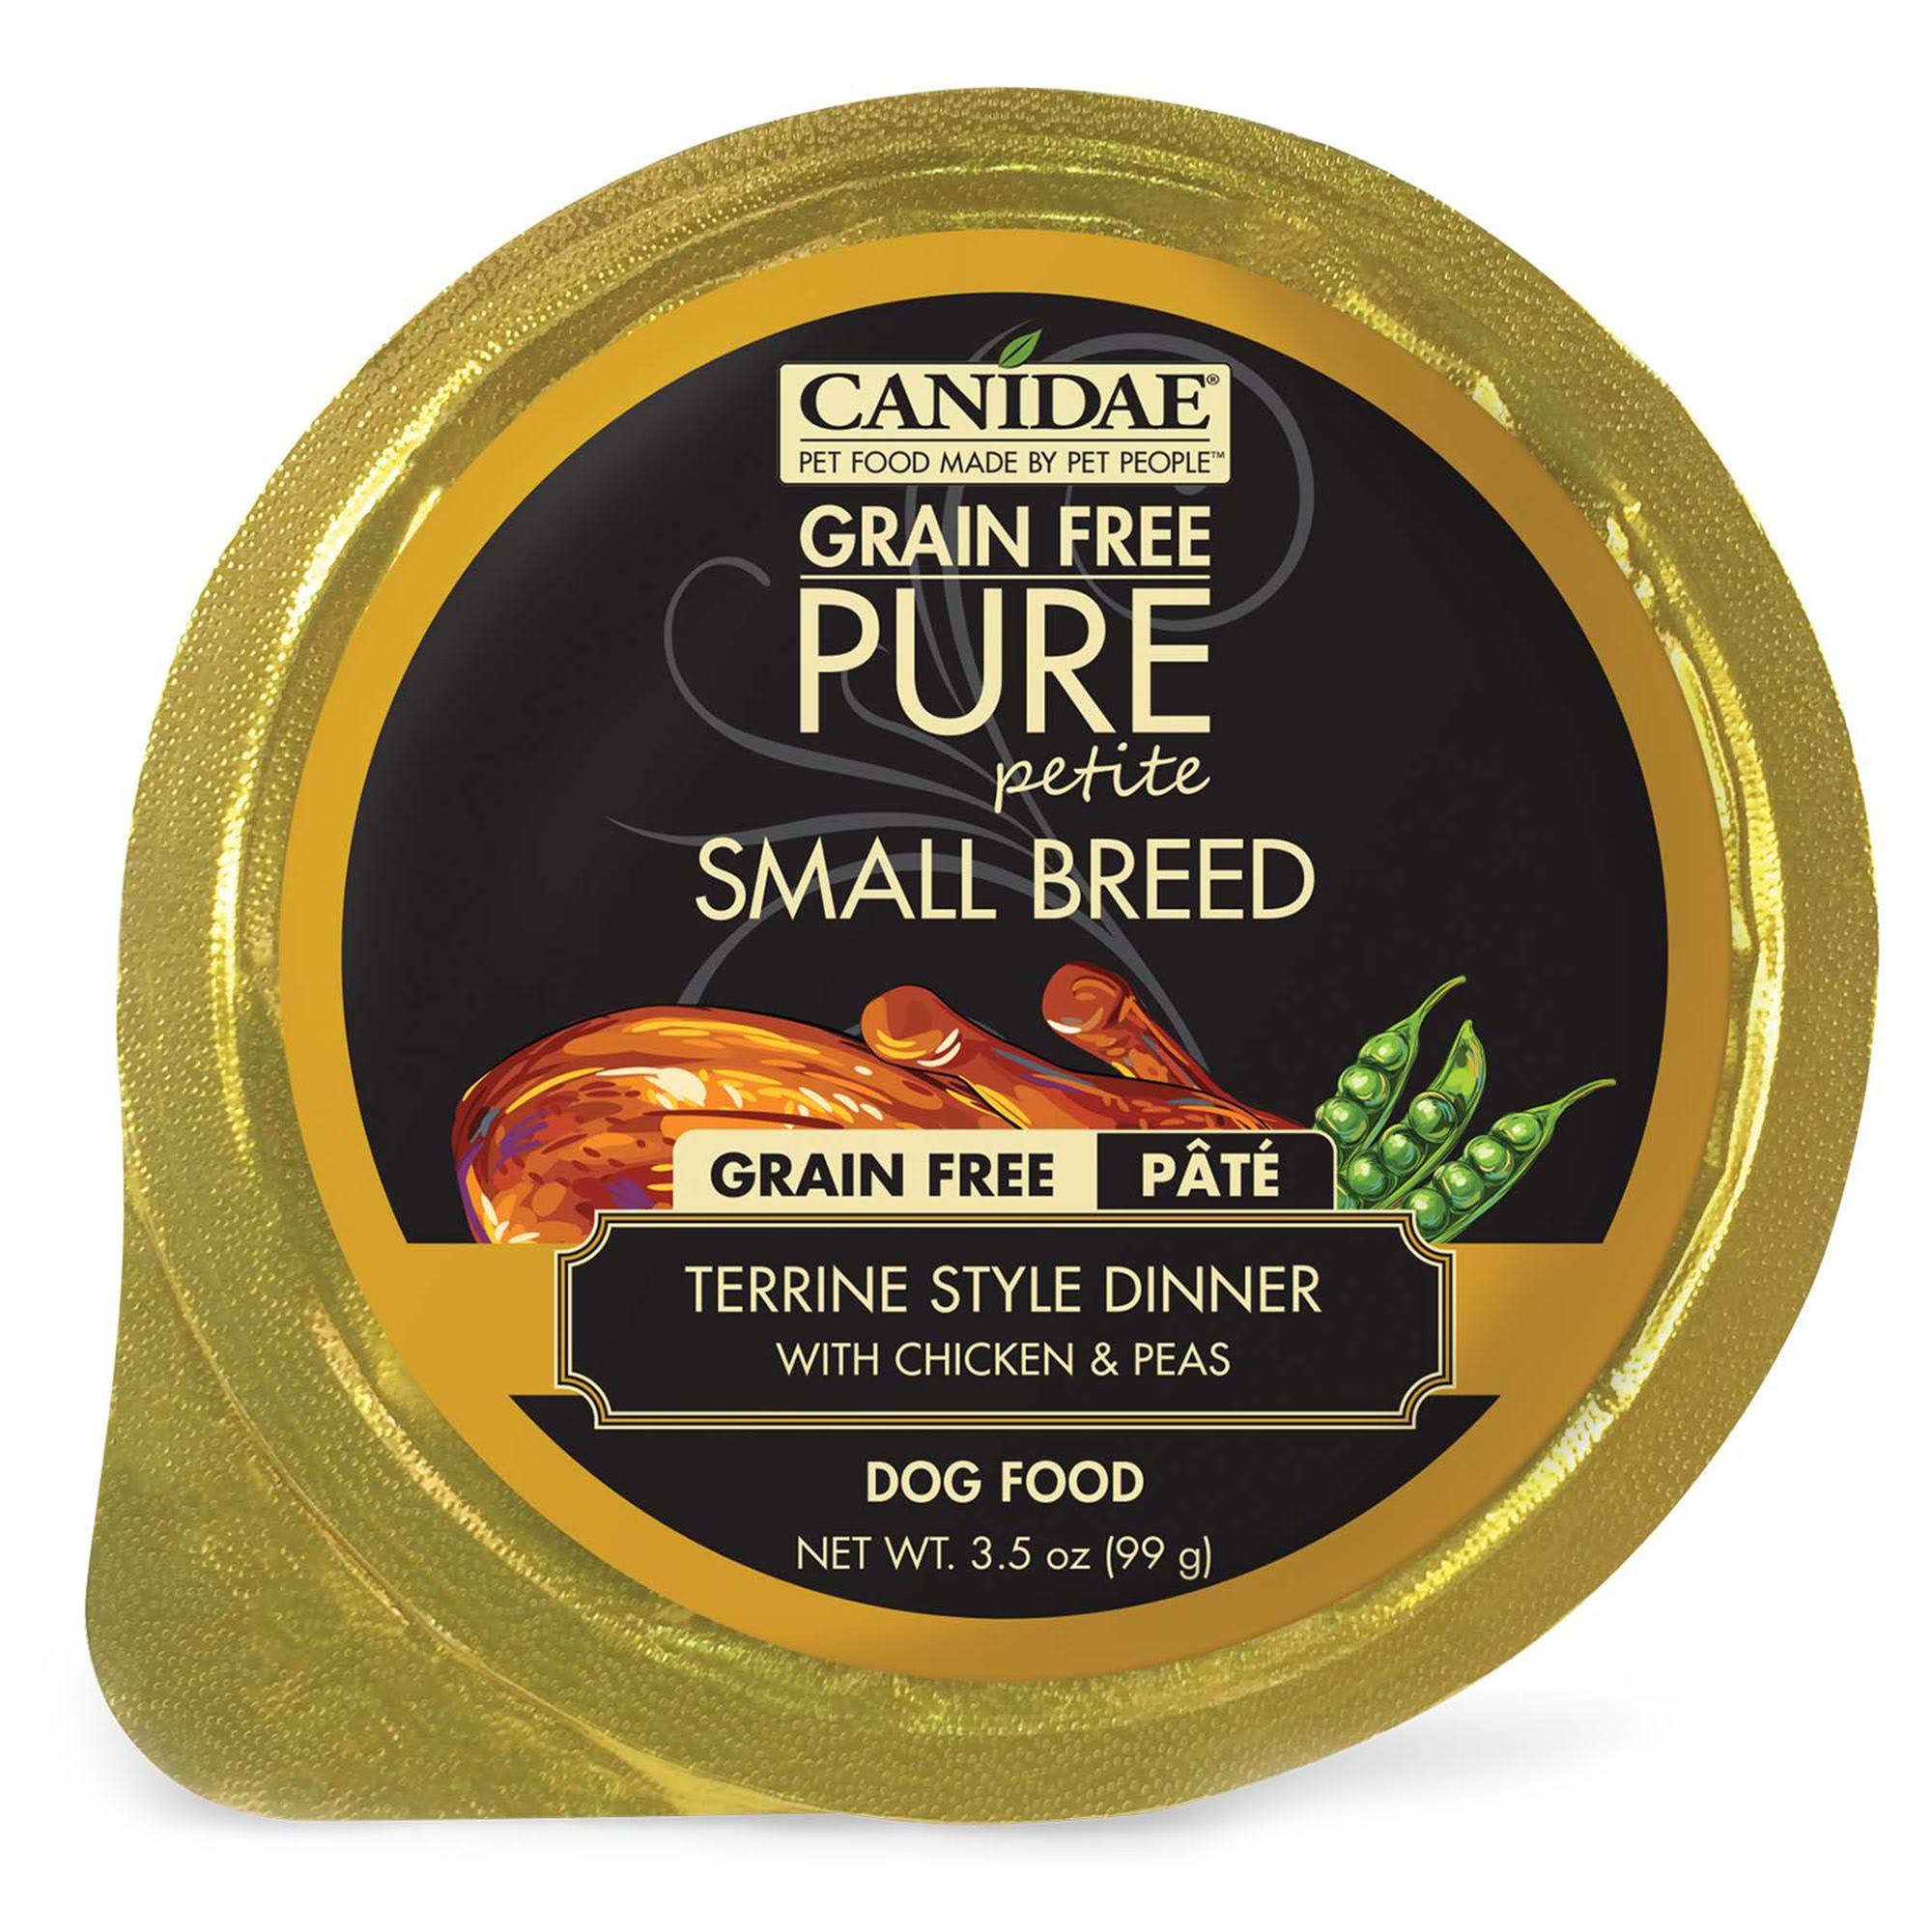 Canidae Pet Foods Grain Free Pure Wet Dog Food Petite Small Breed Terrine Style Dinner 3.5 oz.